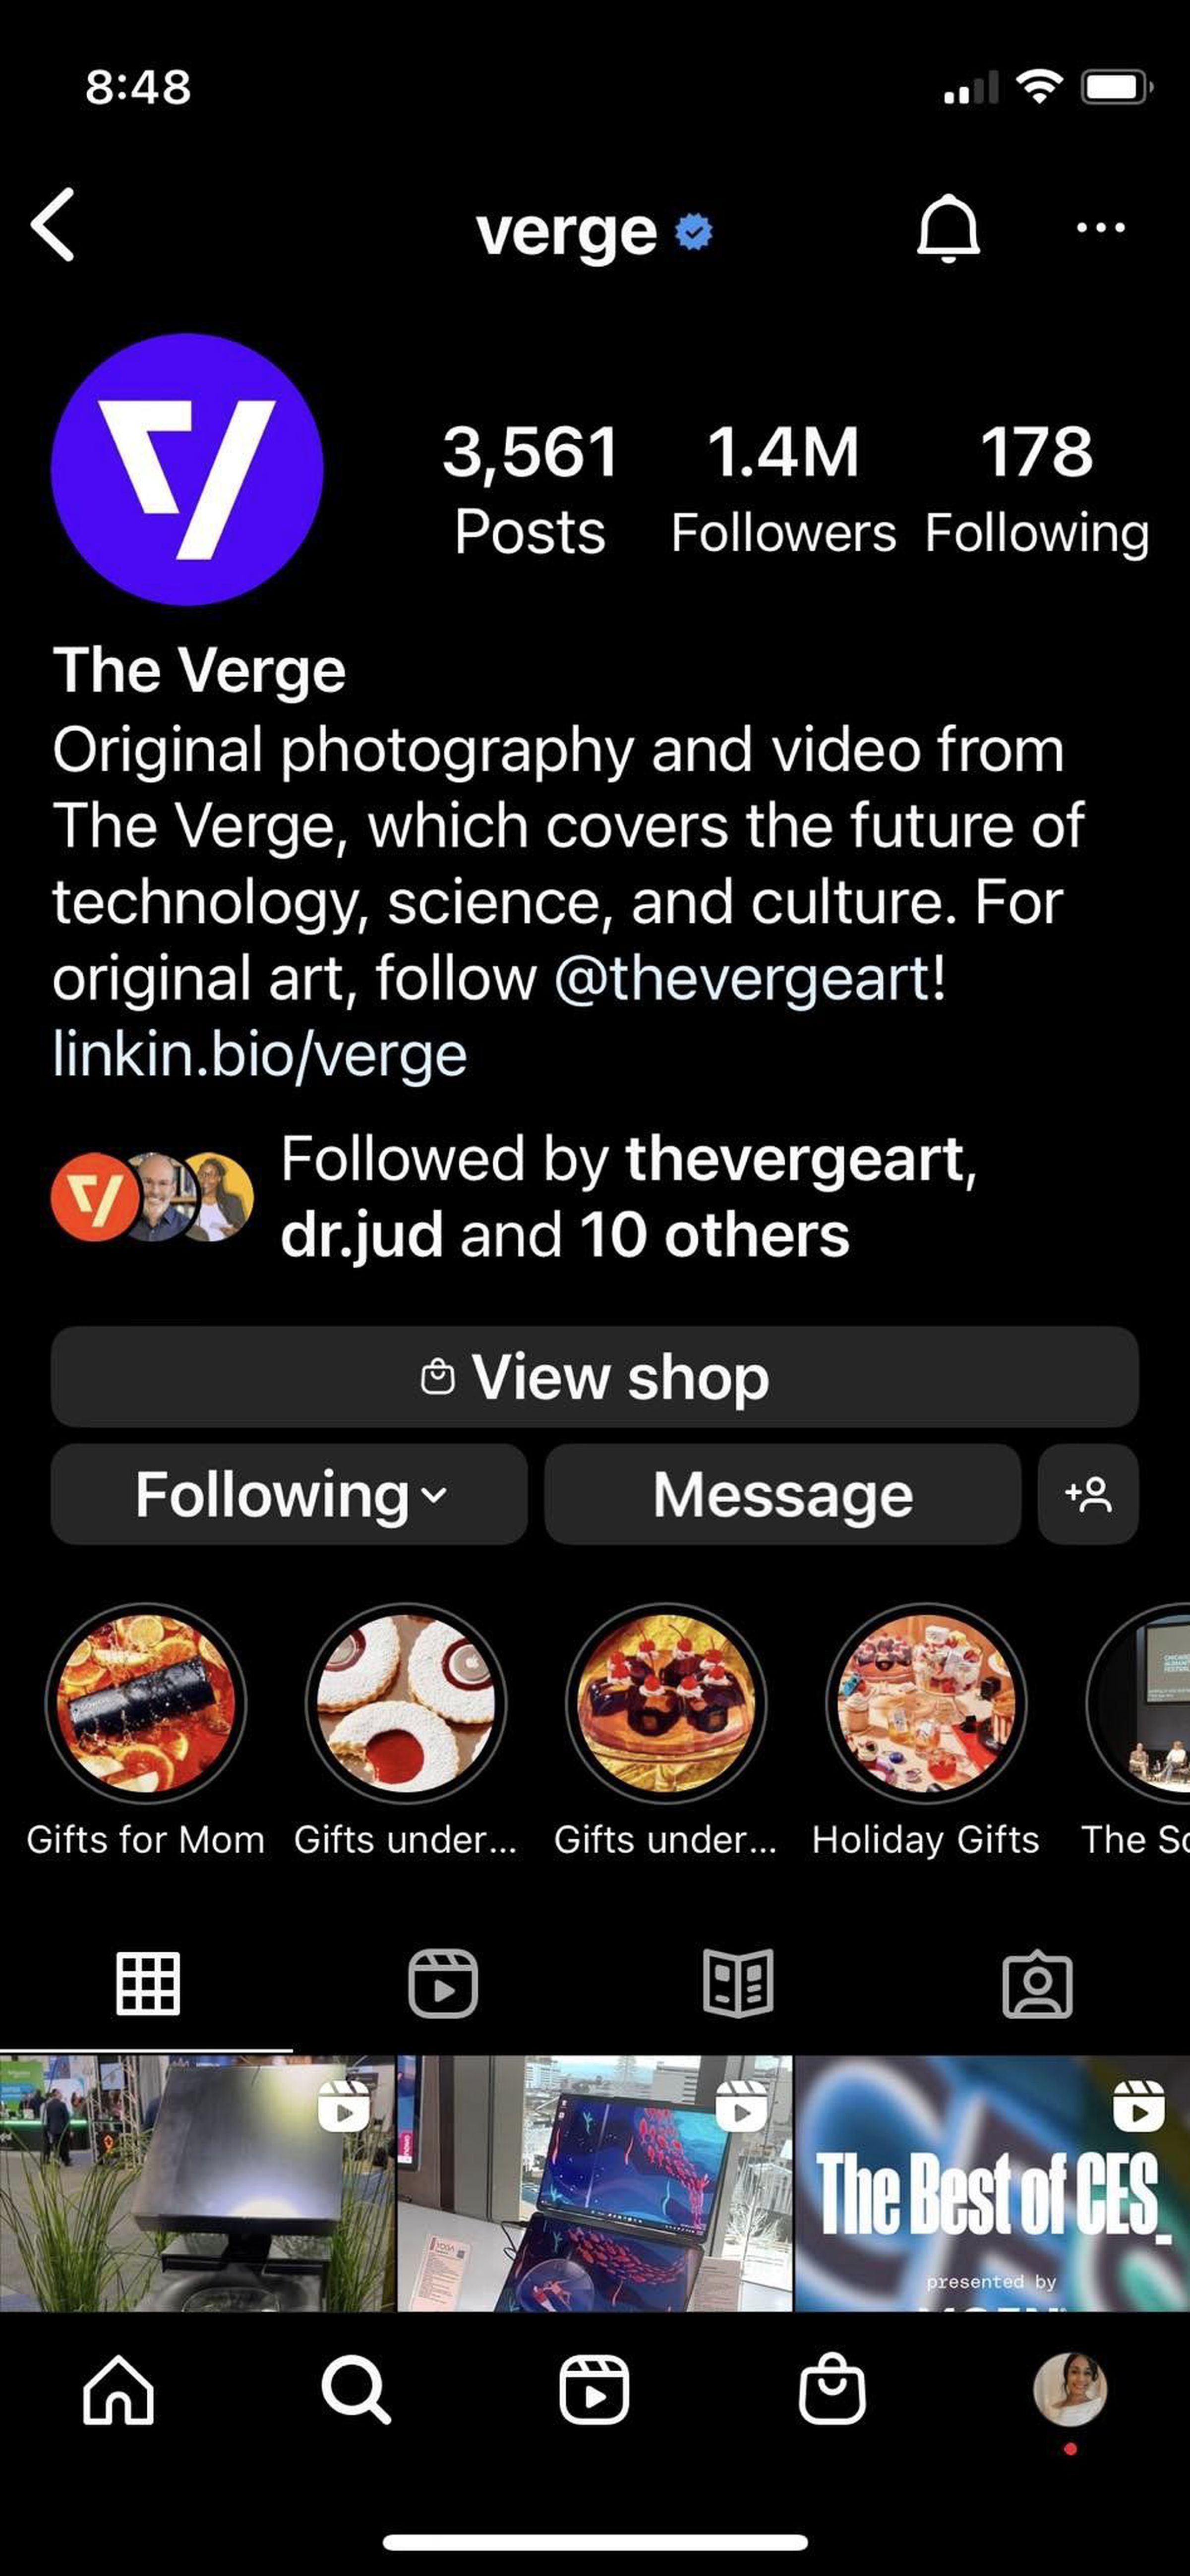 Instagram profile page for The Verge on a phone.